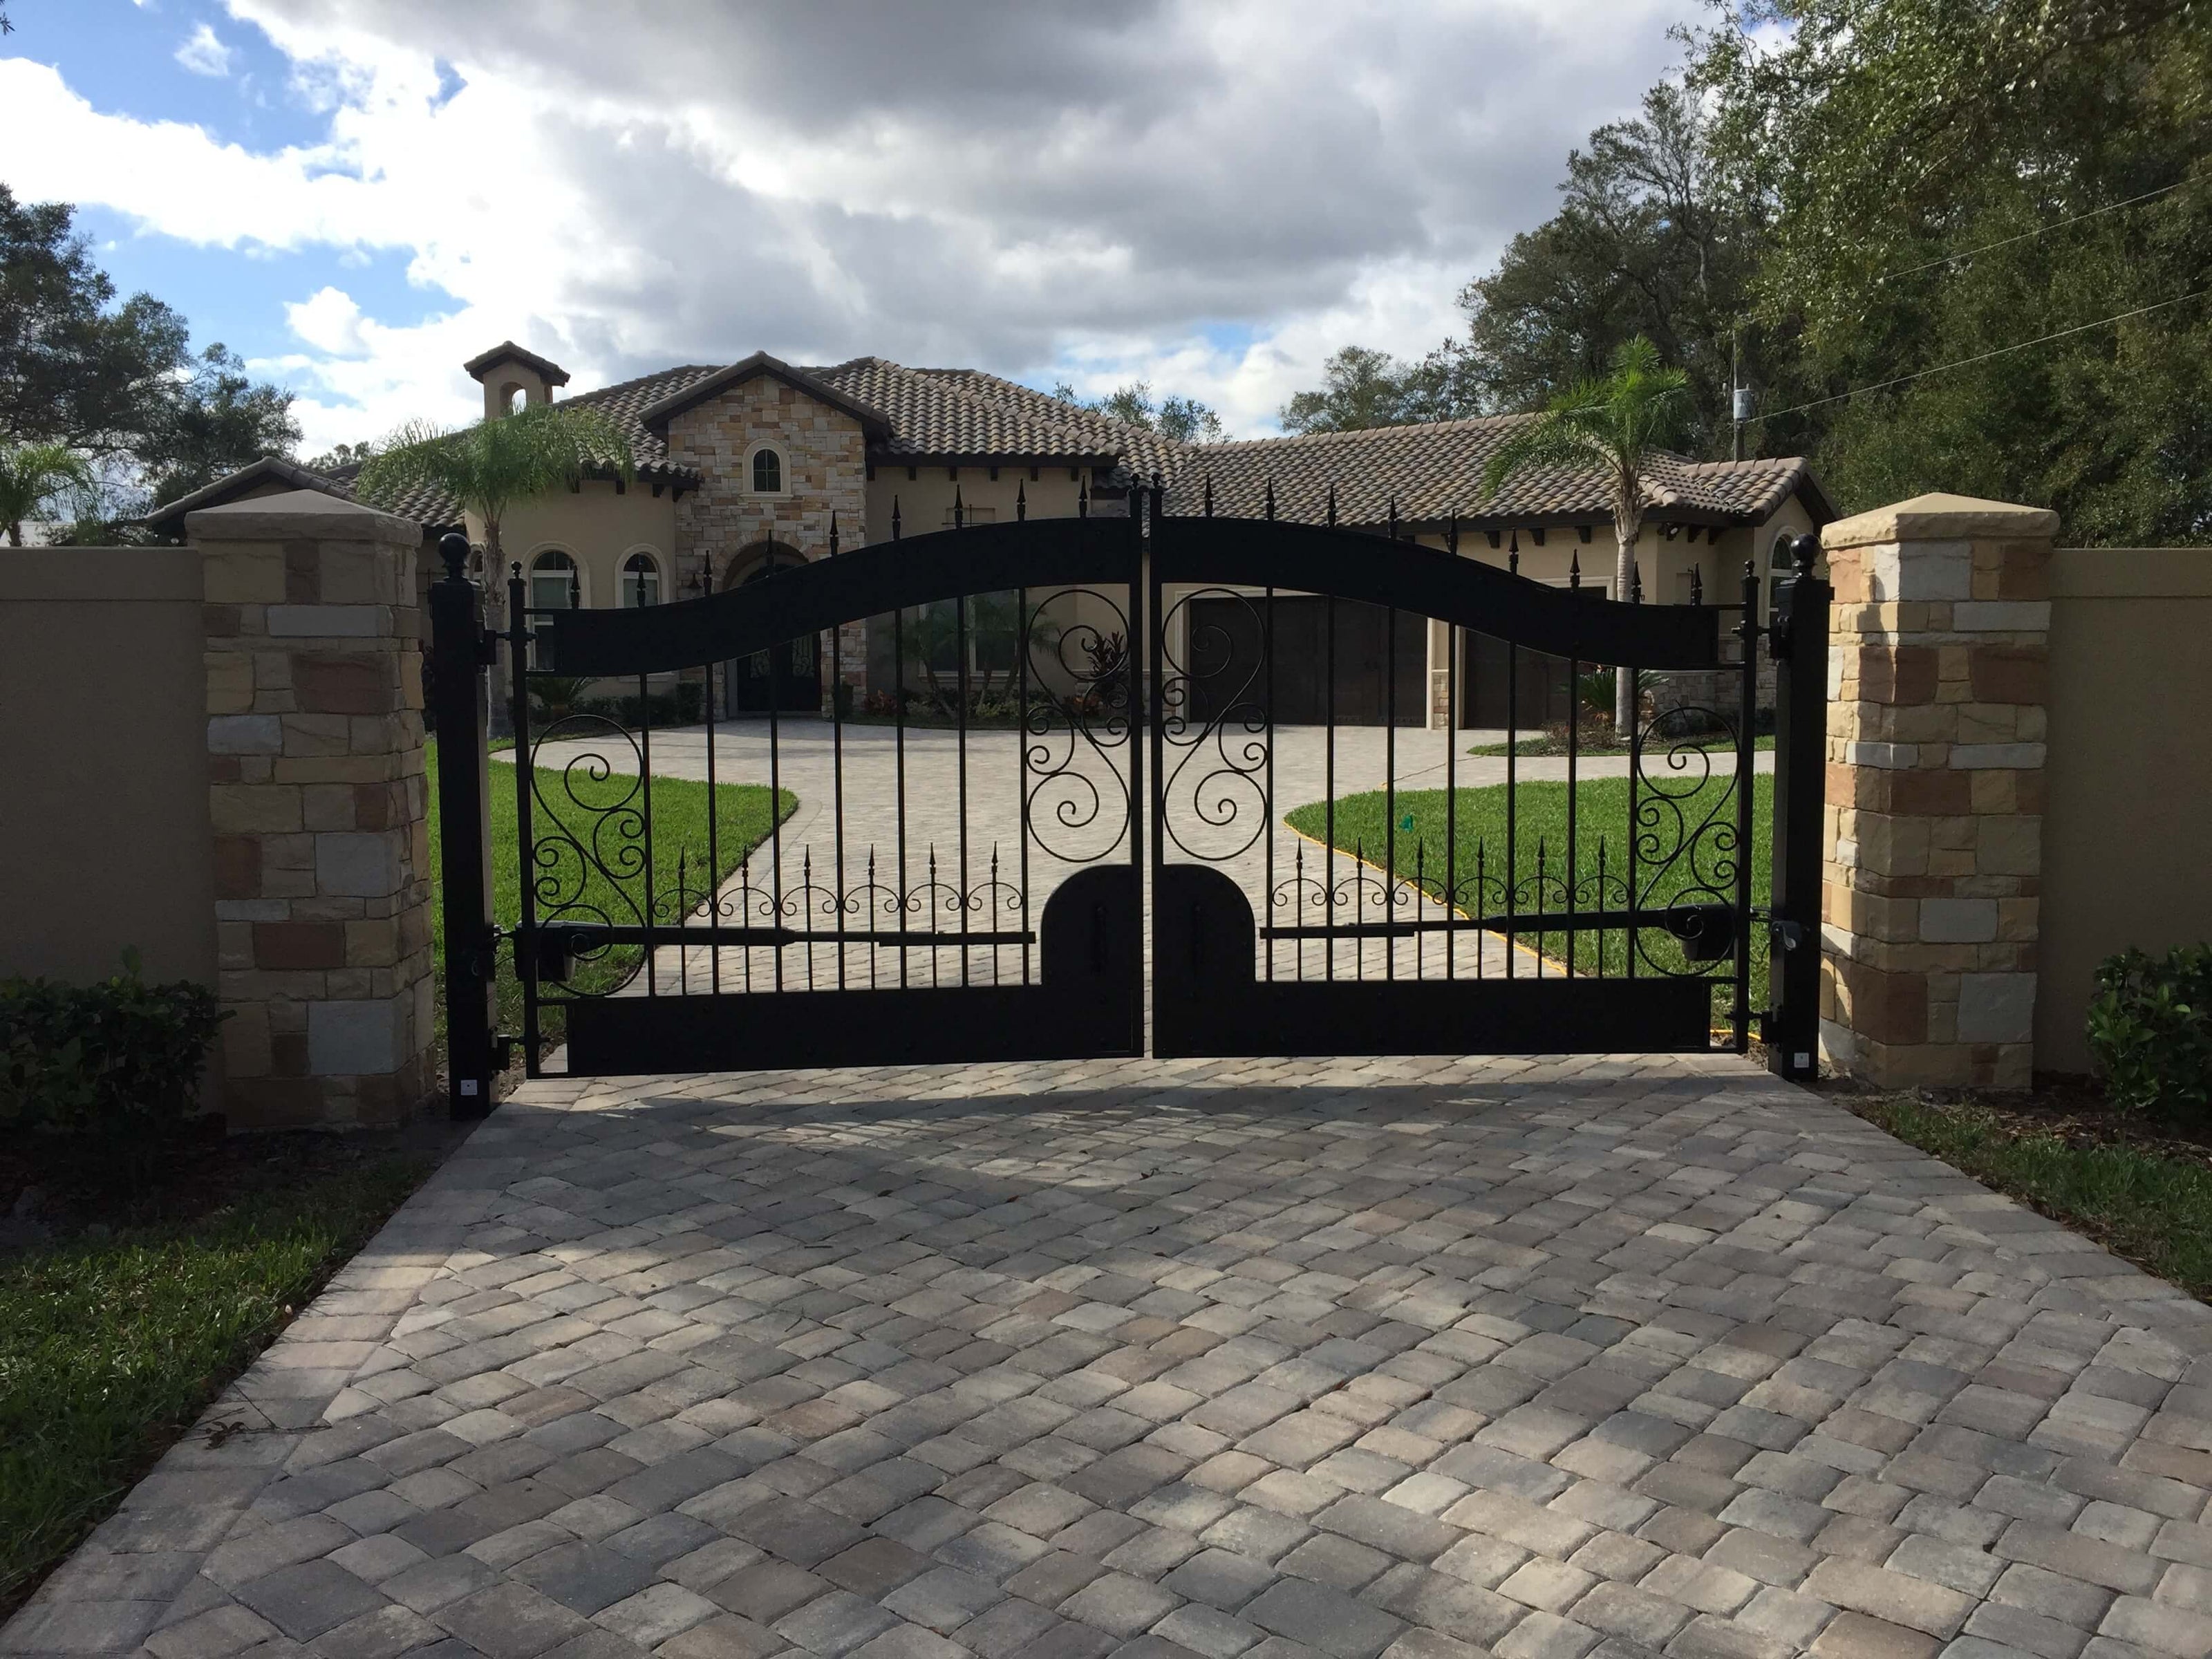 double fancy wrought iron gate with arch, spiral motif set in vertical bars wide bands top and bottom and spear point finials in stone wall on cobblestone driveway in front of large tile roof home